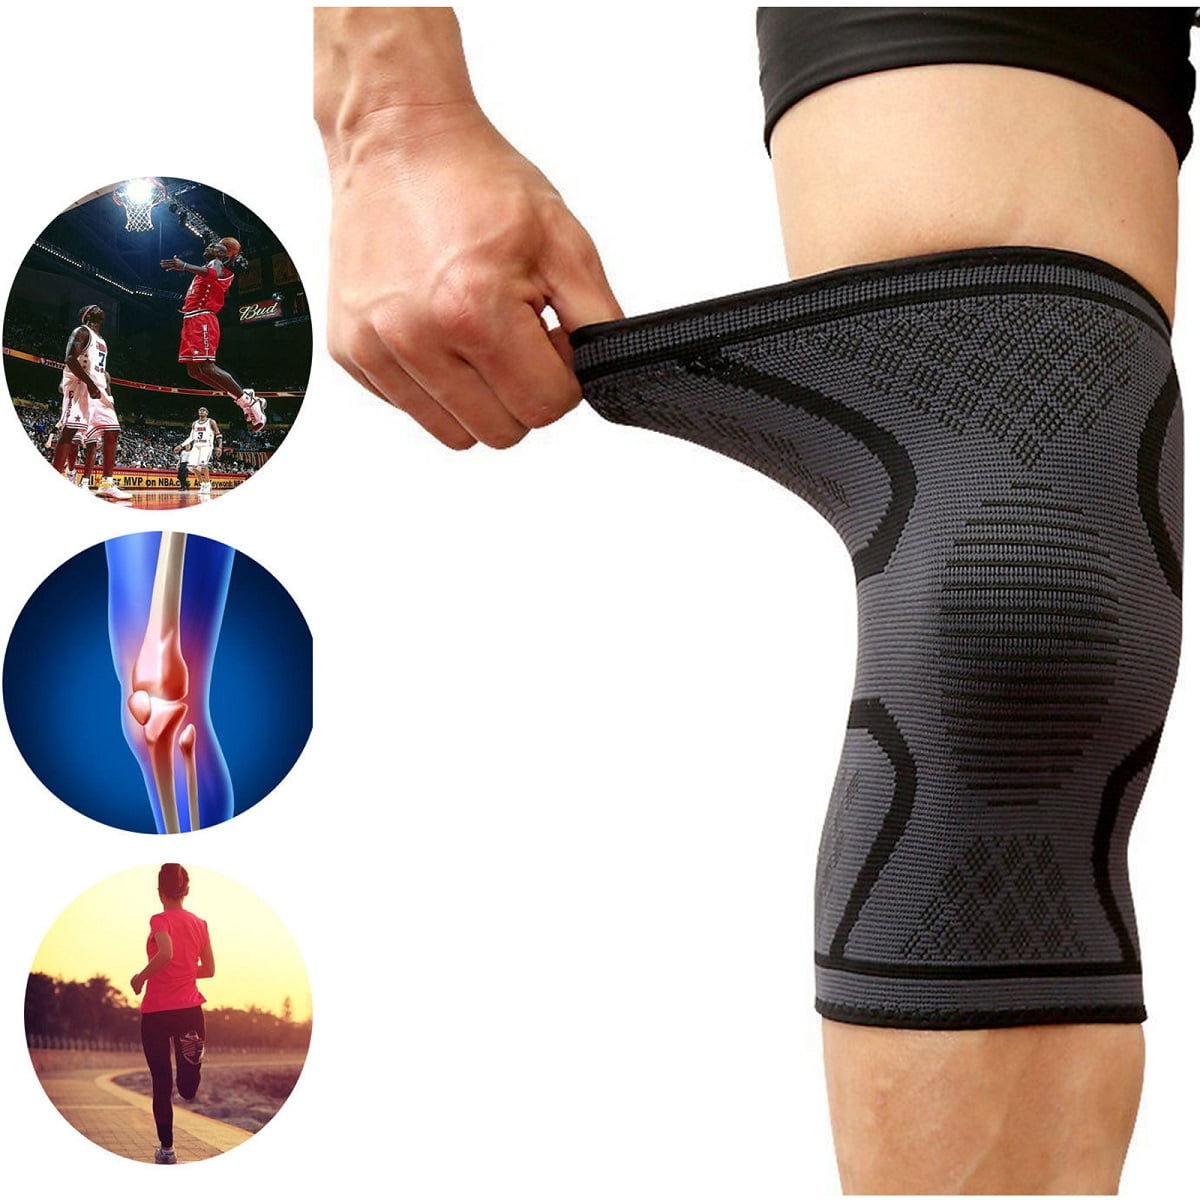 Perfect Joint Pain Relief for Contract Team Sports Knee Braces for Men & Women Athlete Volleyball Football Baseball Softball Cycling ShinyPro Knee Compression Sleeves with Pads Black, M 